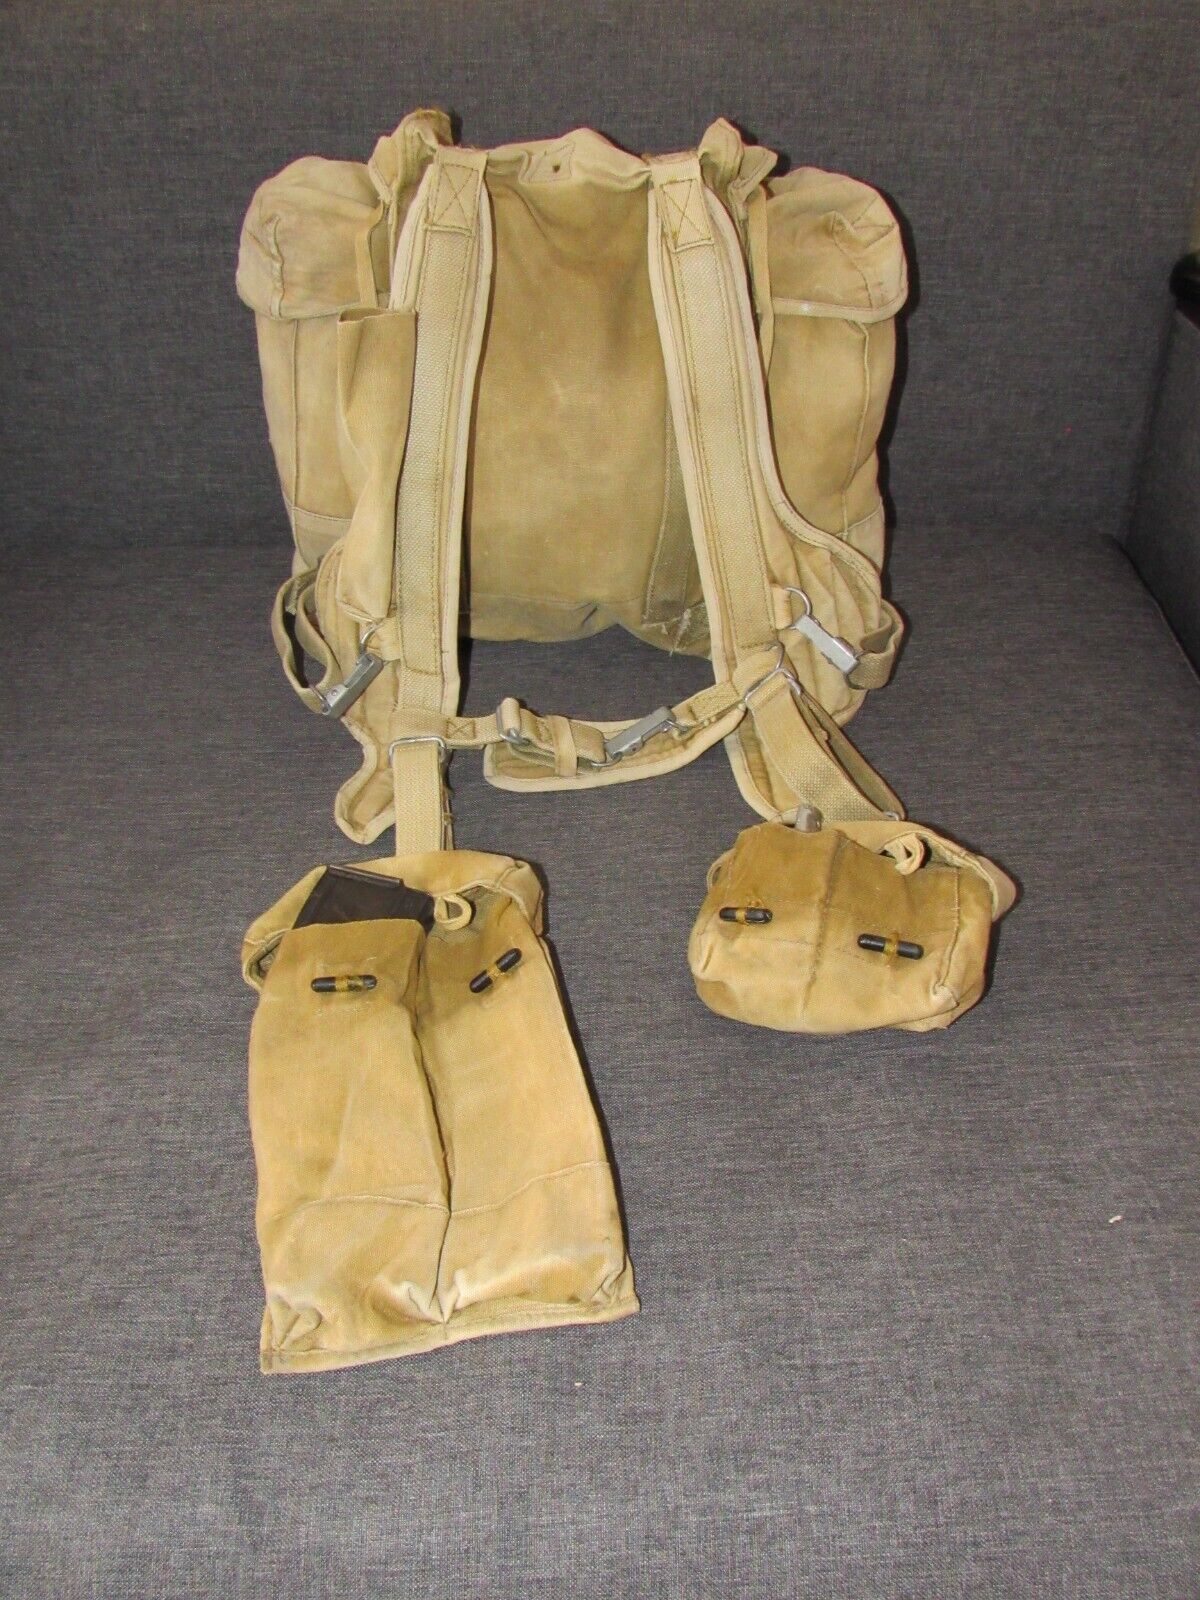 Soviet Russian Army Airborne VDV Backpack RD54 Afghanistan war